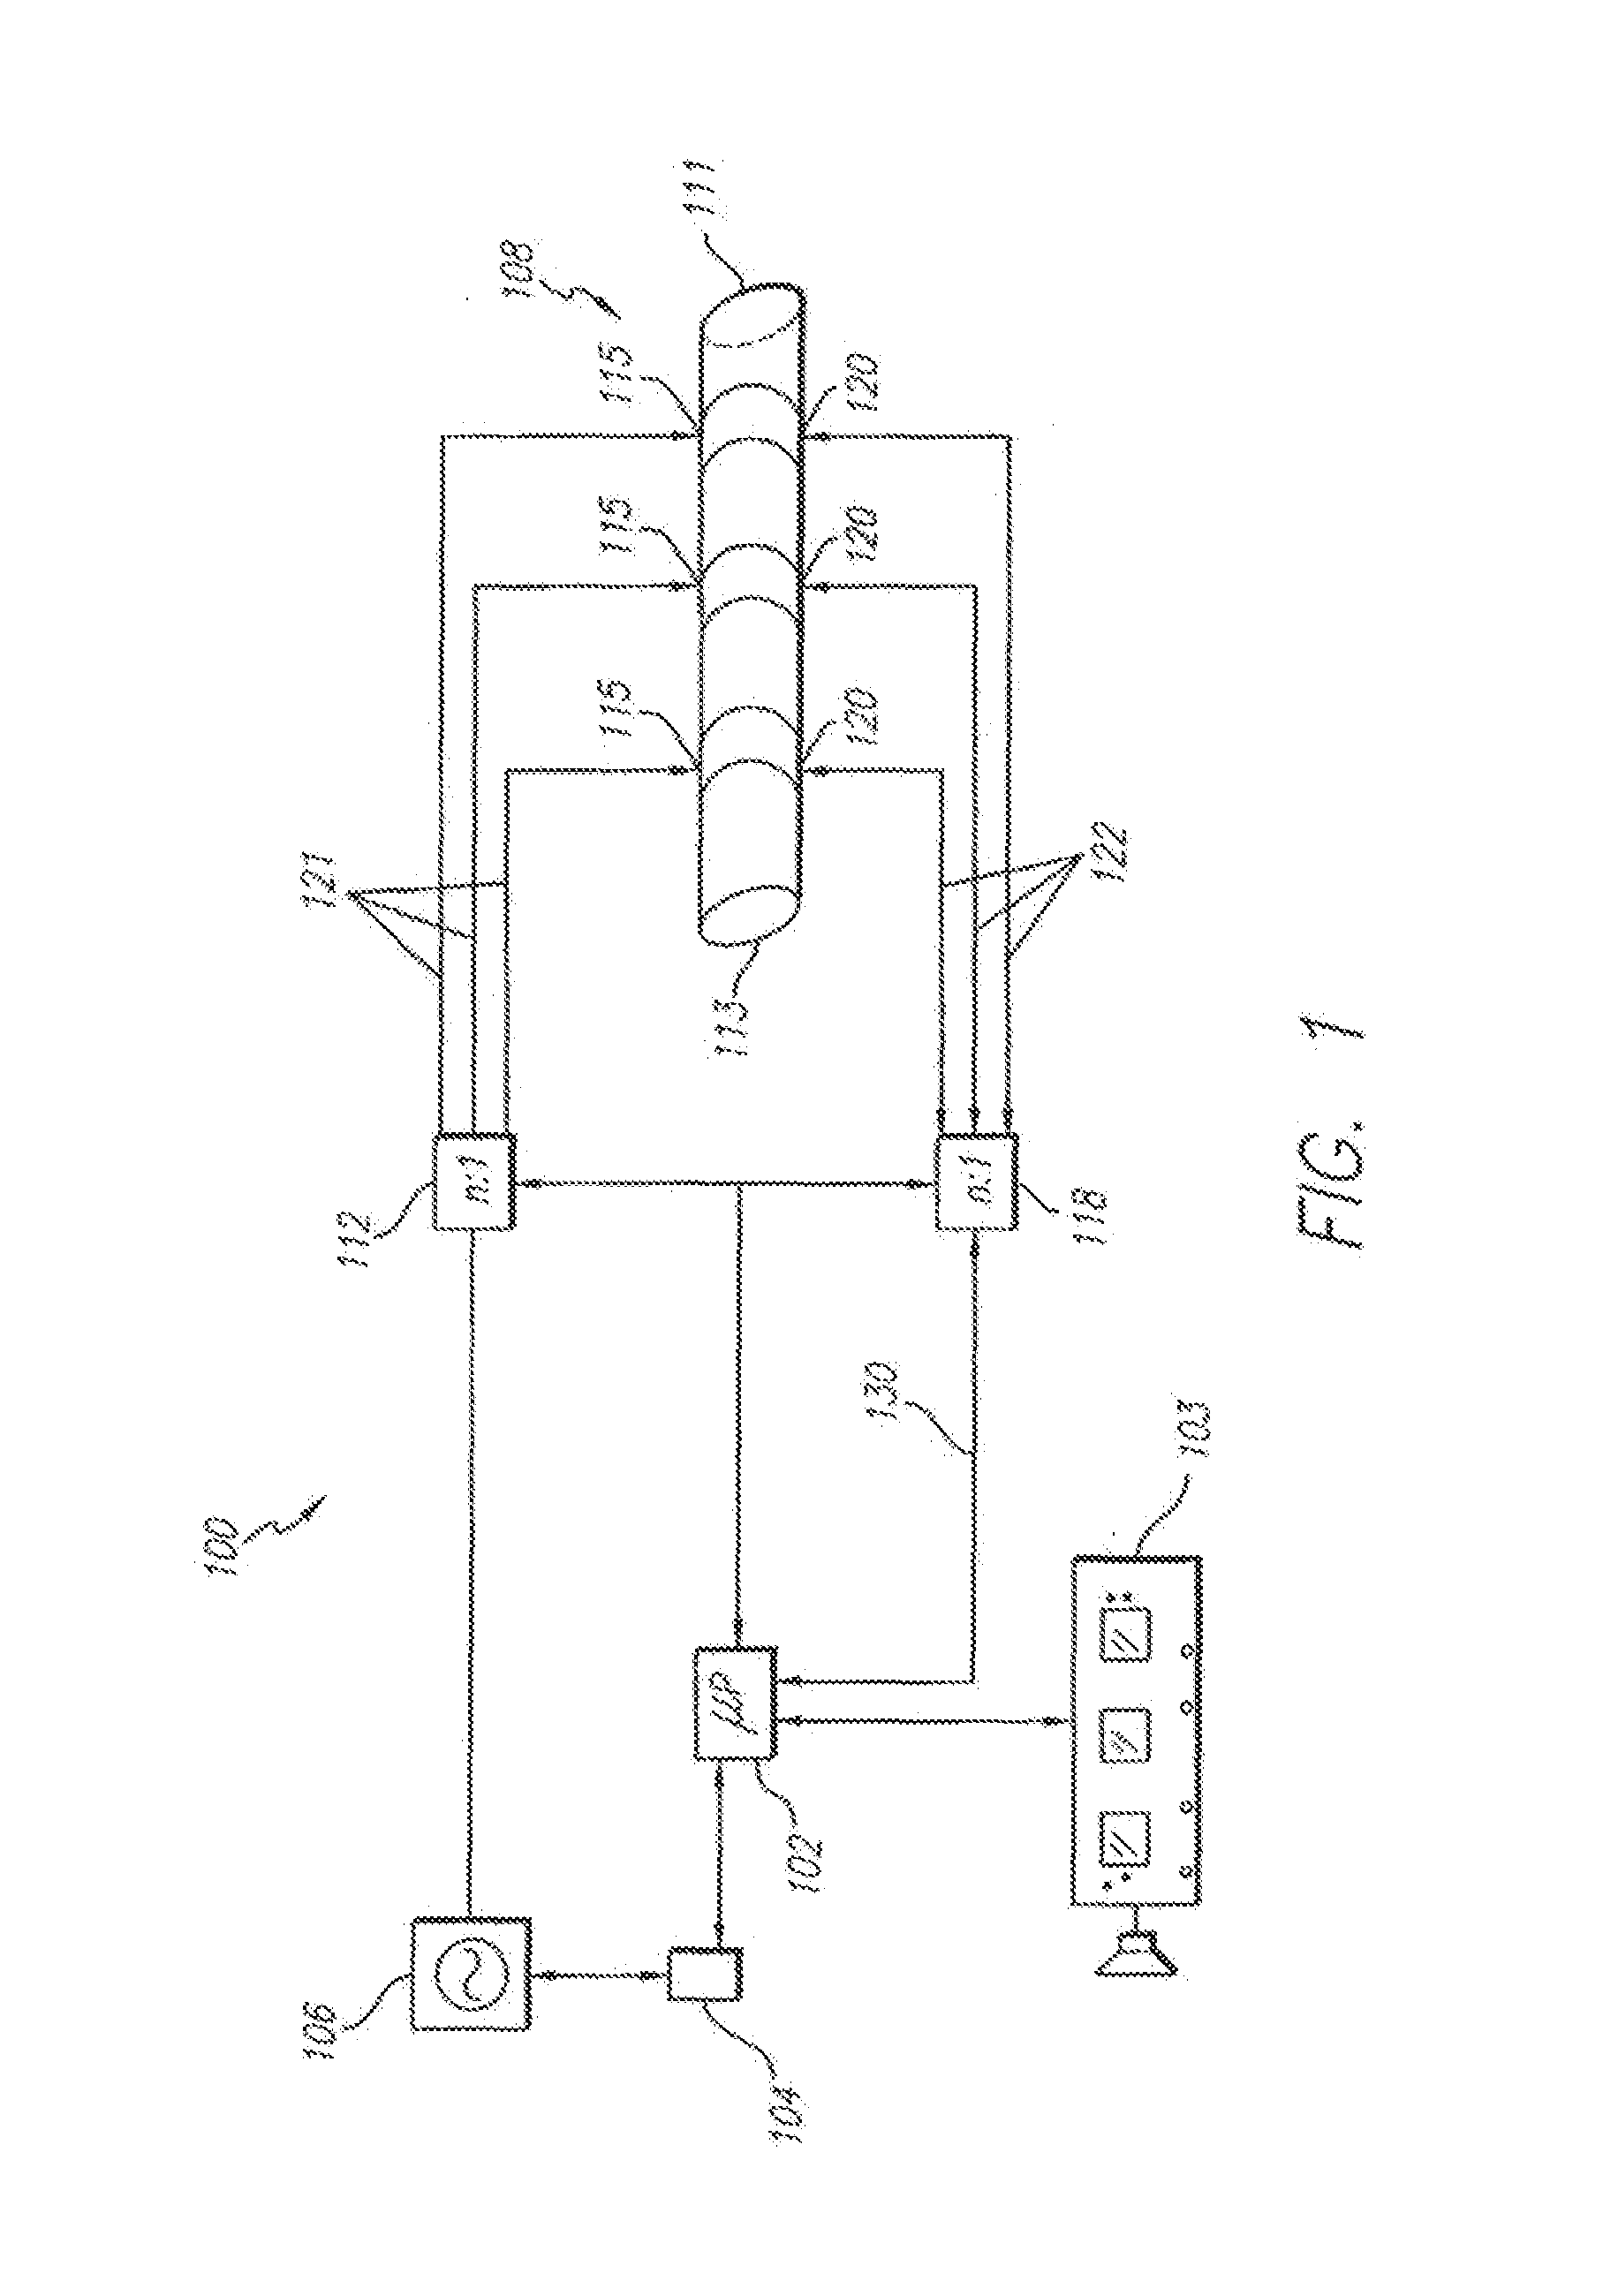 Systems and methods for controlling power in an electrosurgical probe